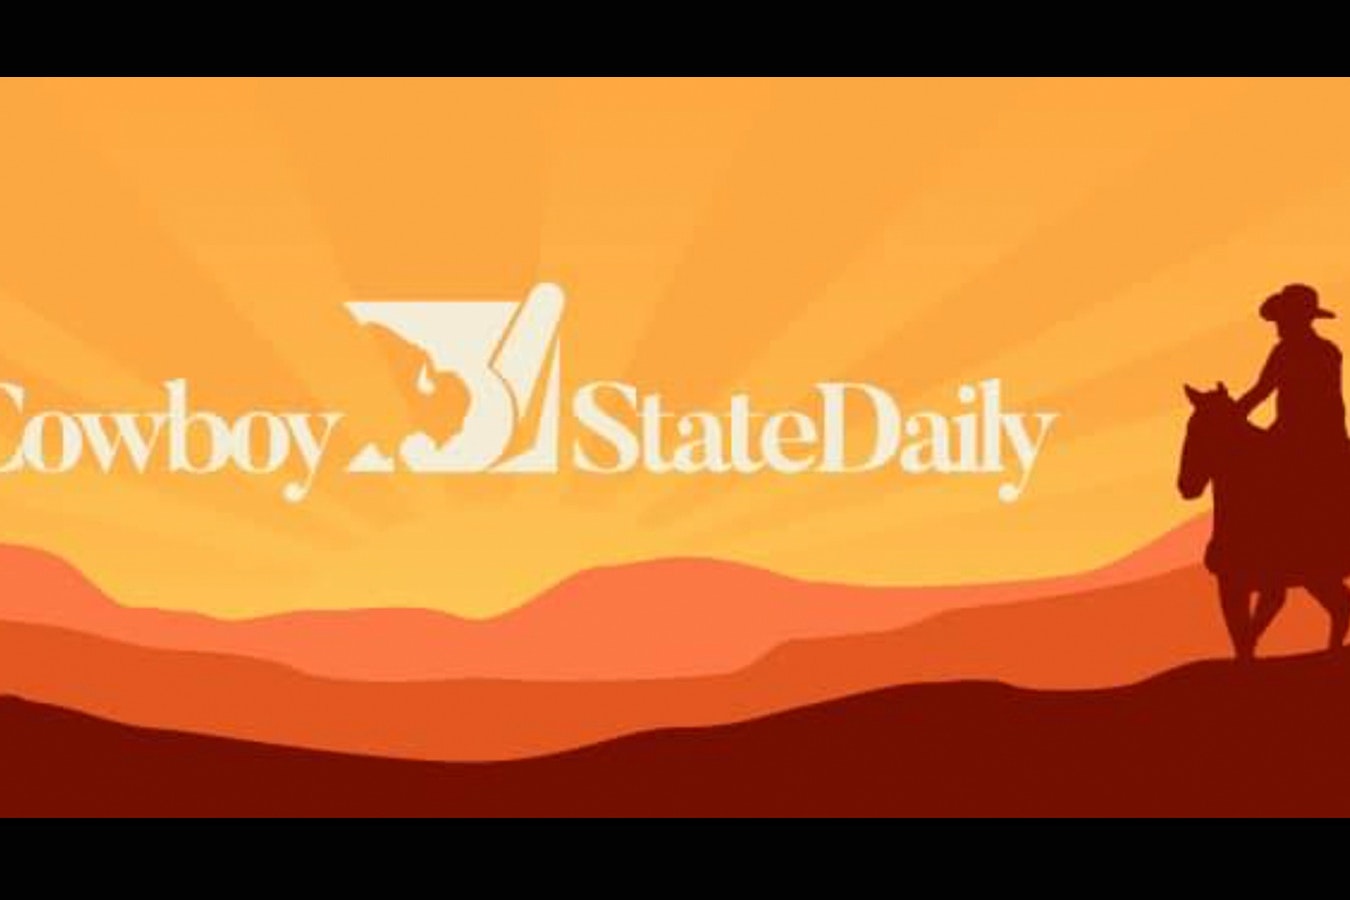 Cowboy state daily logo for radio 7 25 23